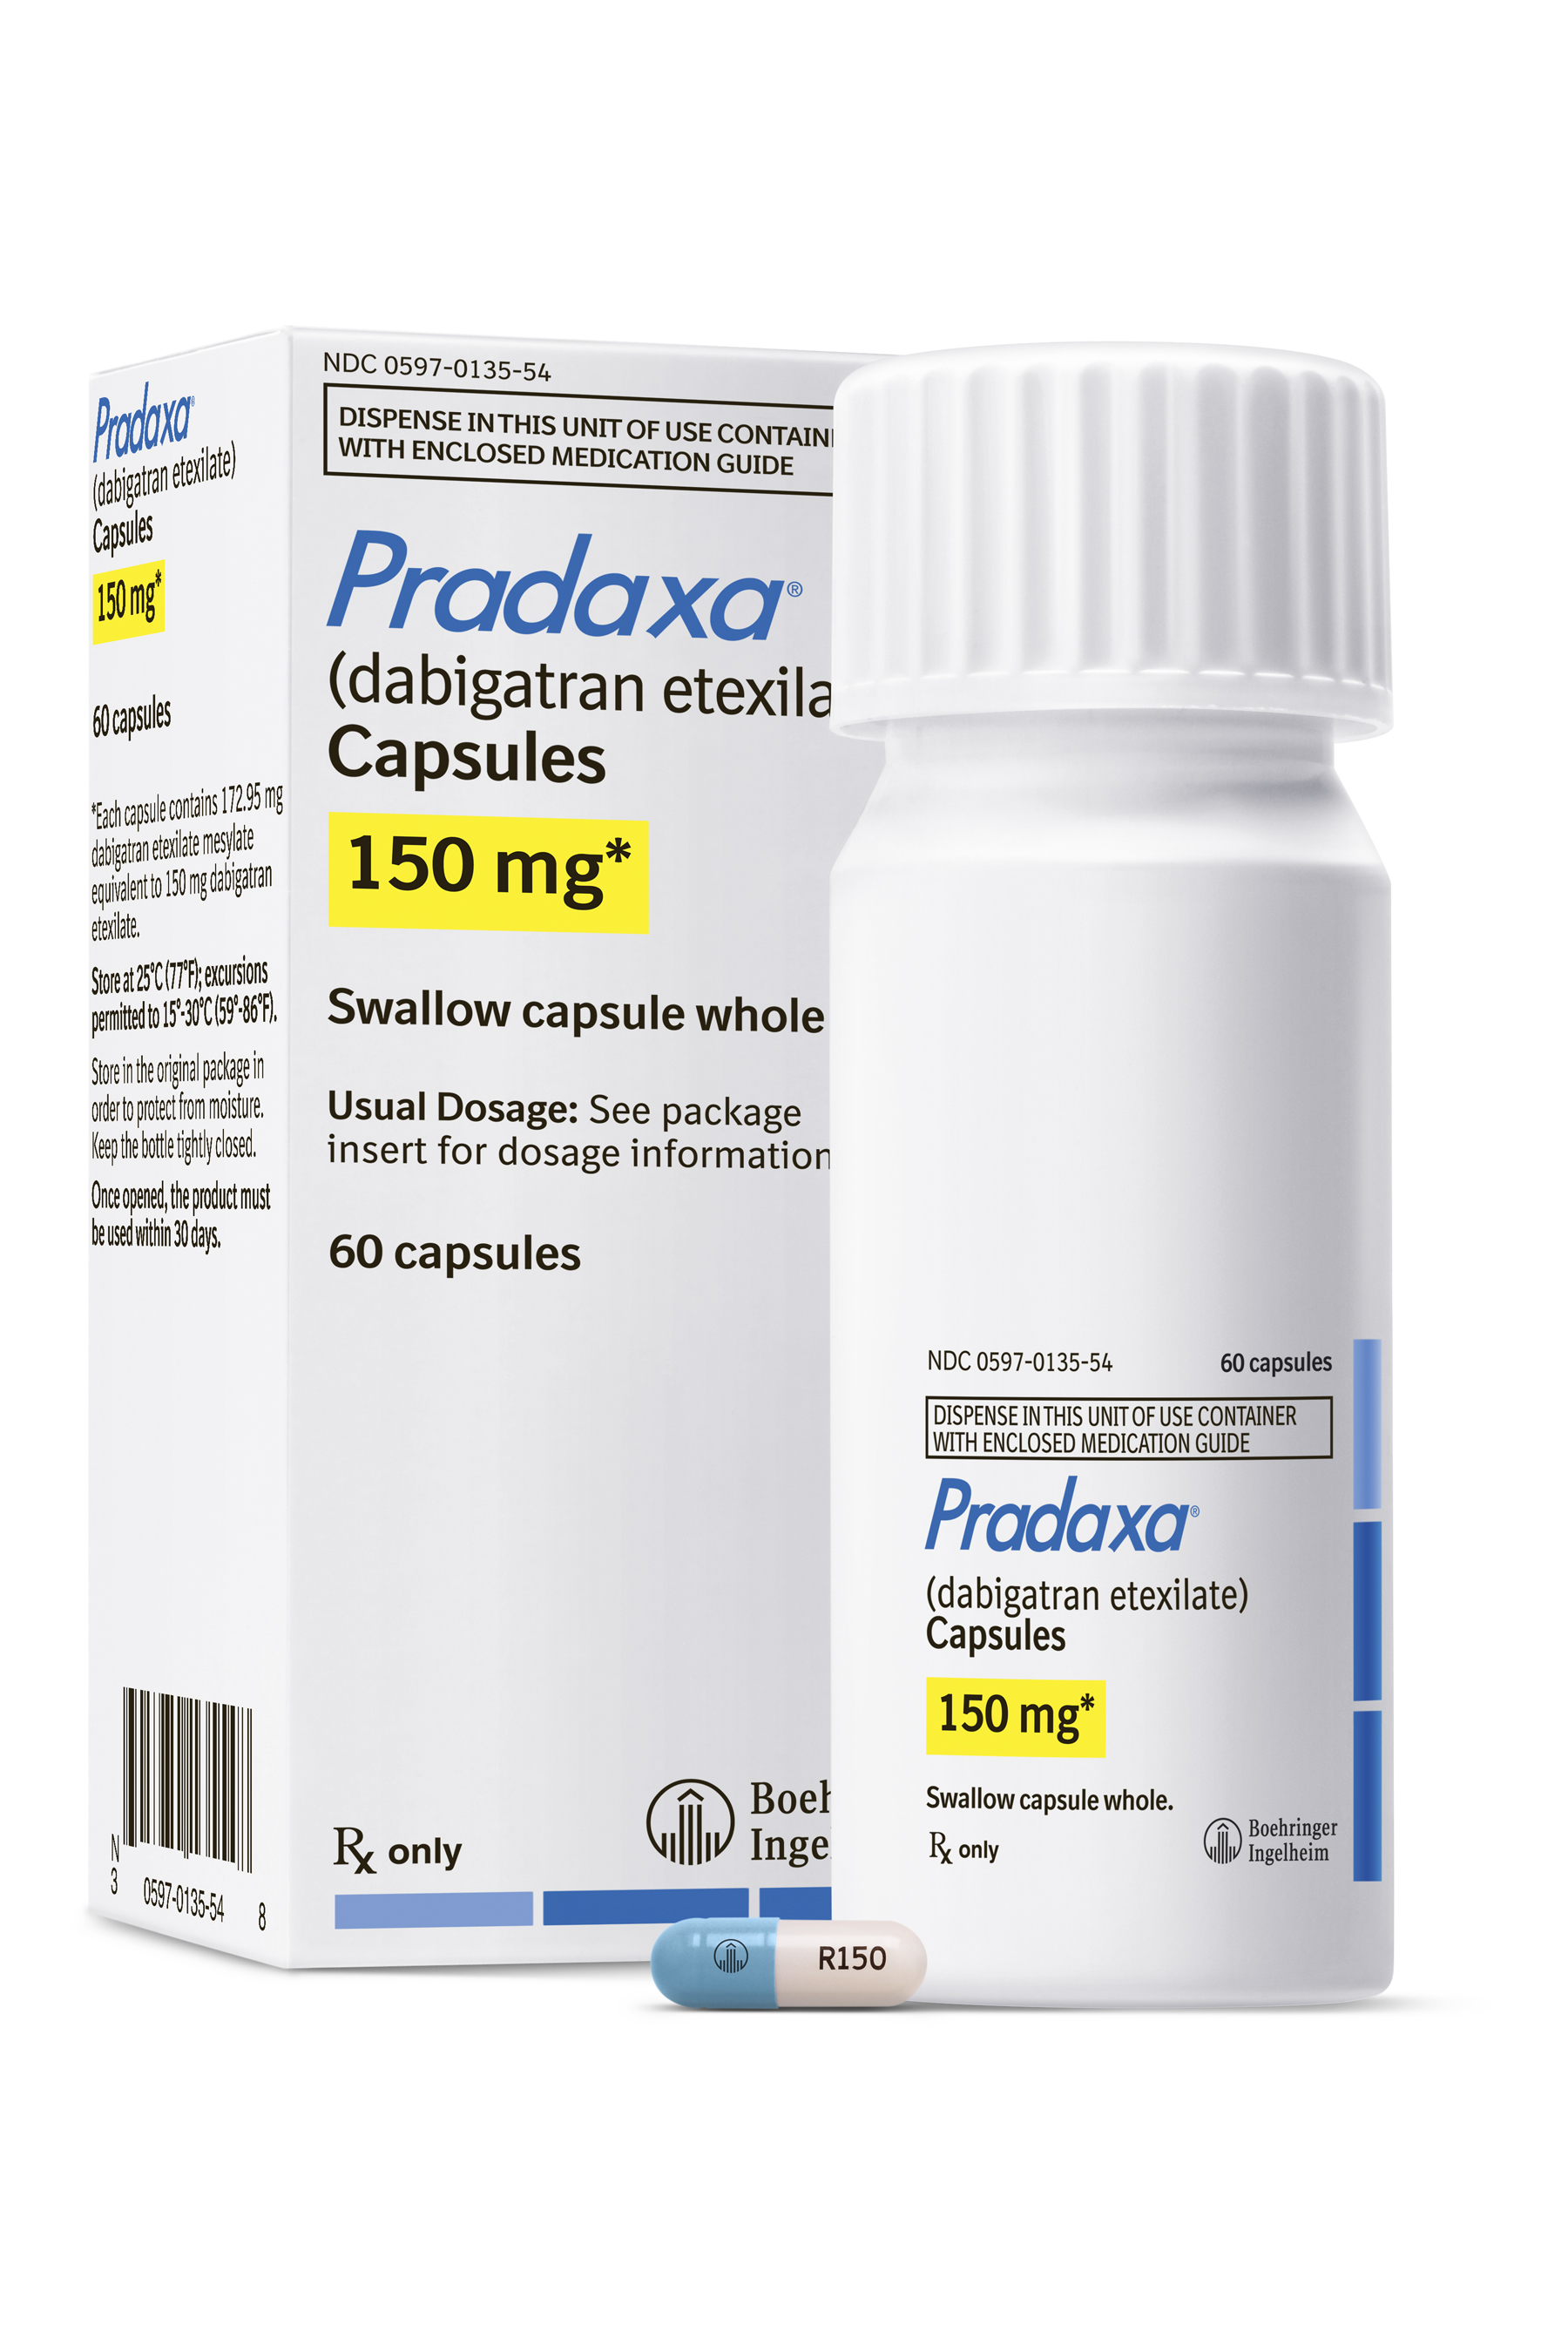 Controversial Conclusions of Pradaxa Blood Test Study Concealed